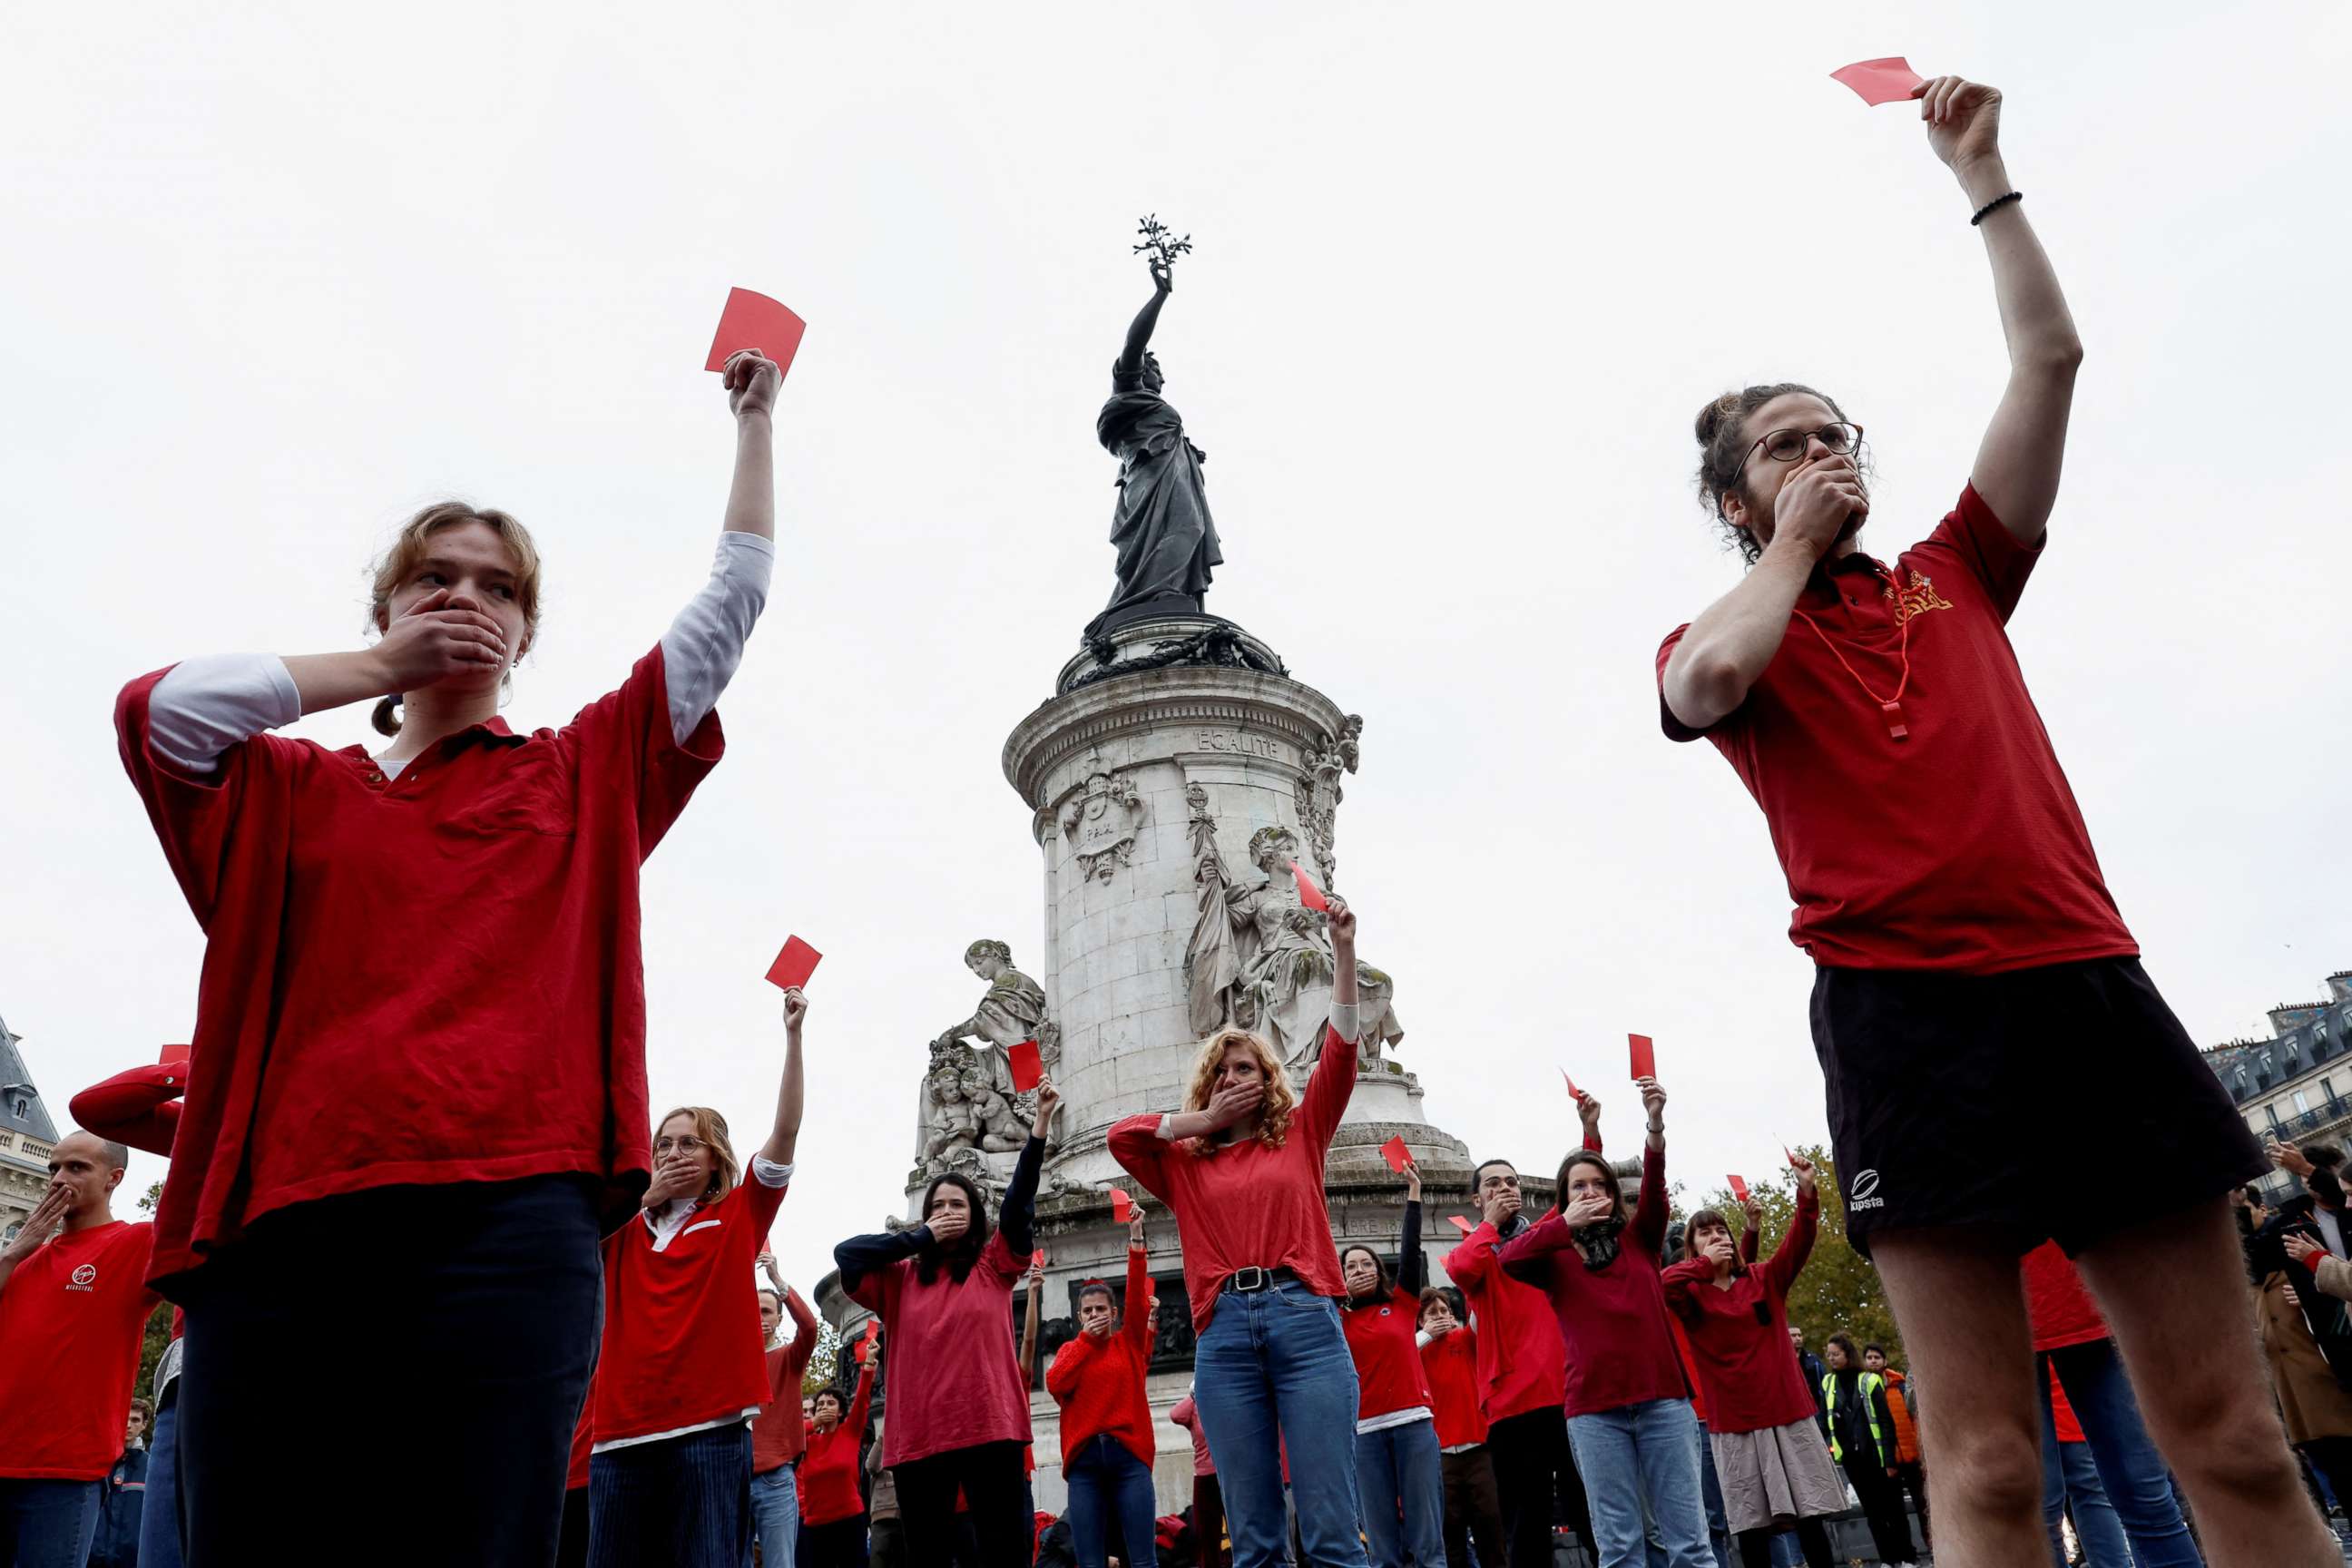 PHOTO: Activists from "Carton rouge pour le Qatar" (Red card for the Qatar) stage a demonstration to protest against the FIFA World Cup Qatar, at the Place de la Republique in Paris, Nov. 20, 2022.